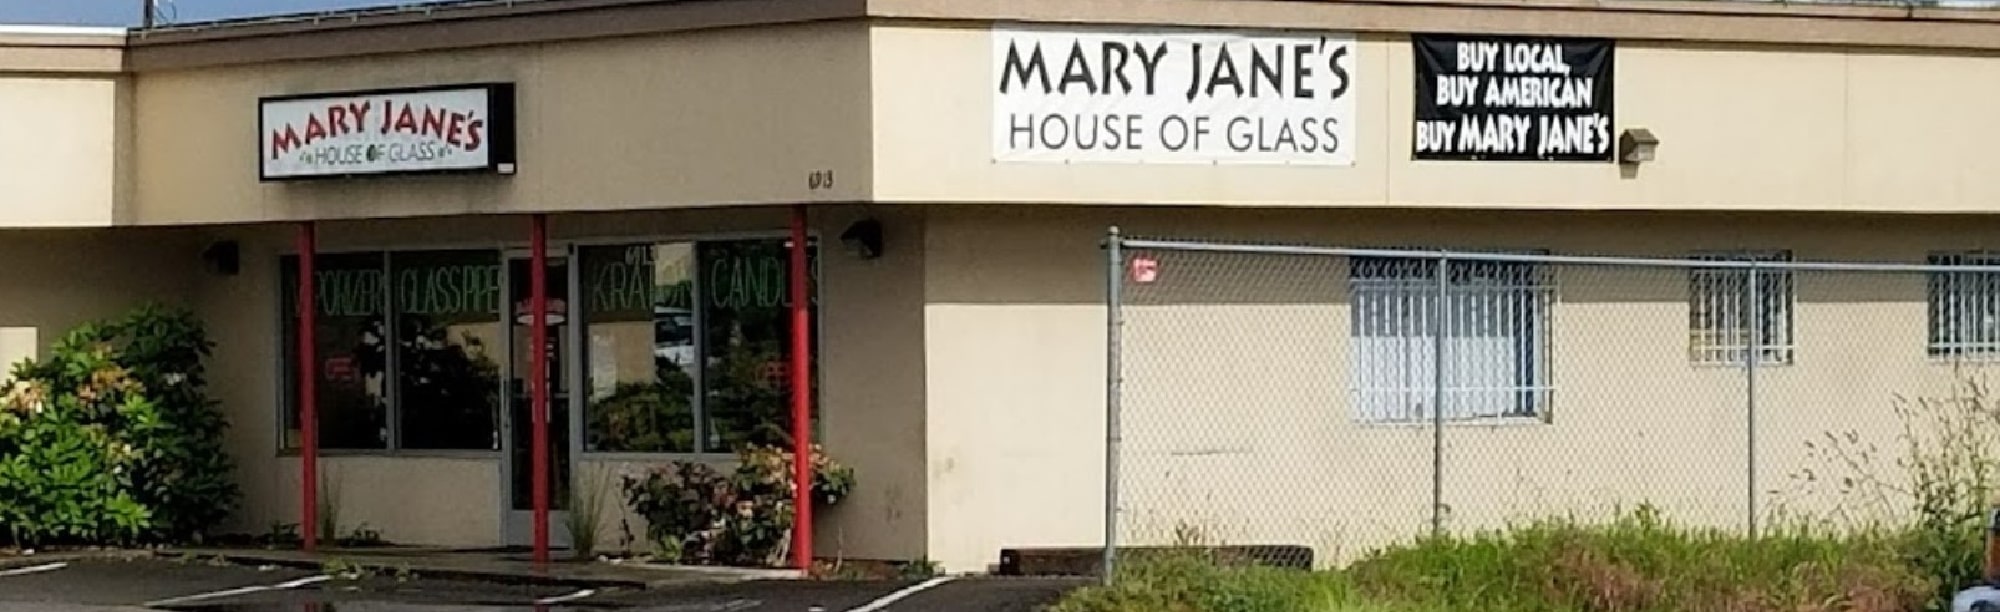 image of mary janes house of glass in vancouver wa